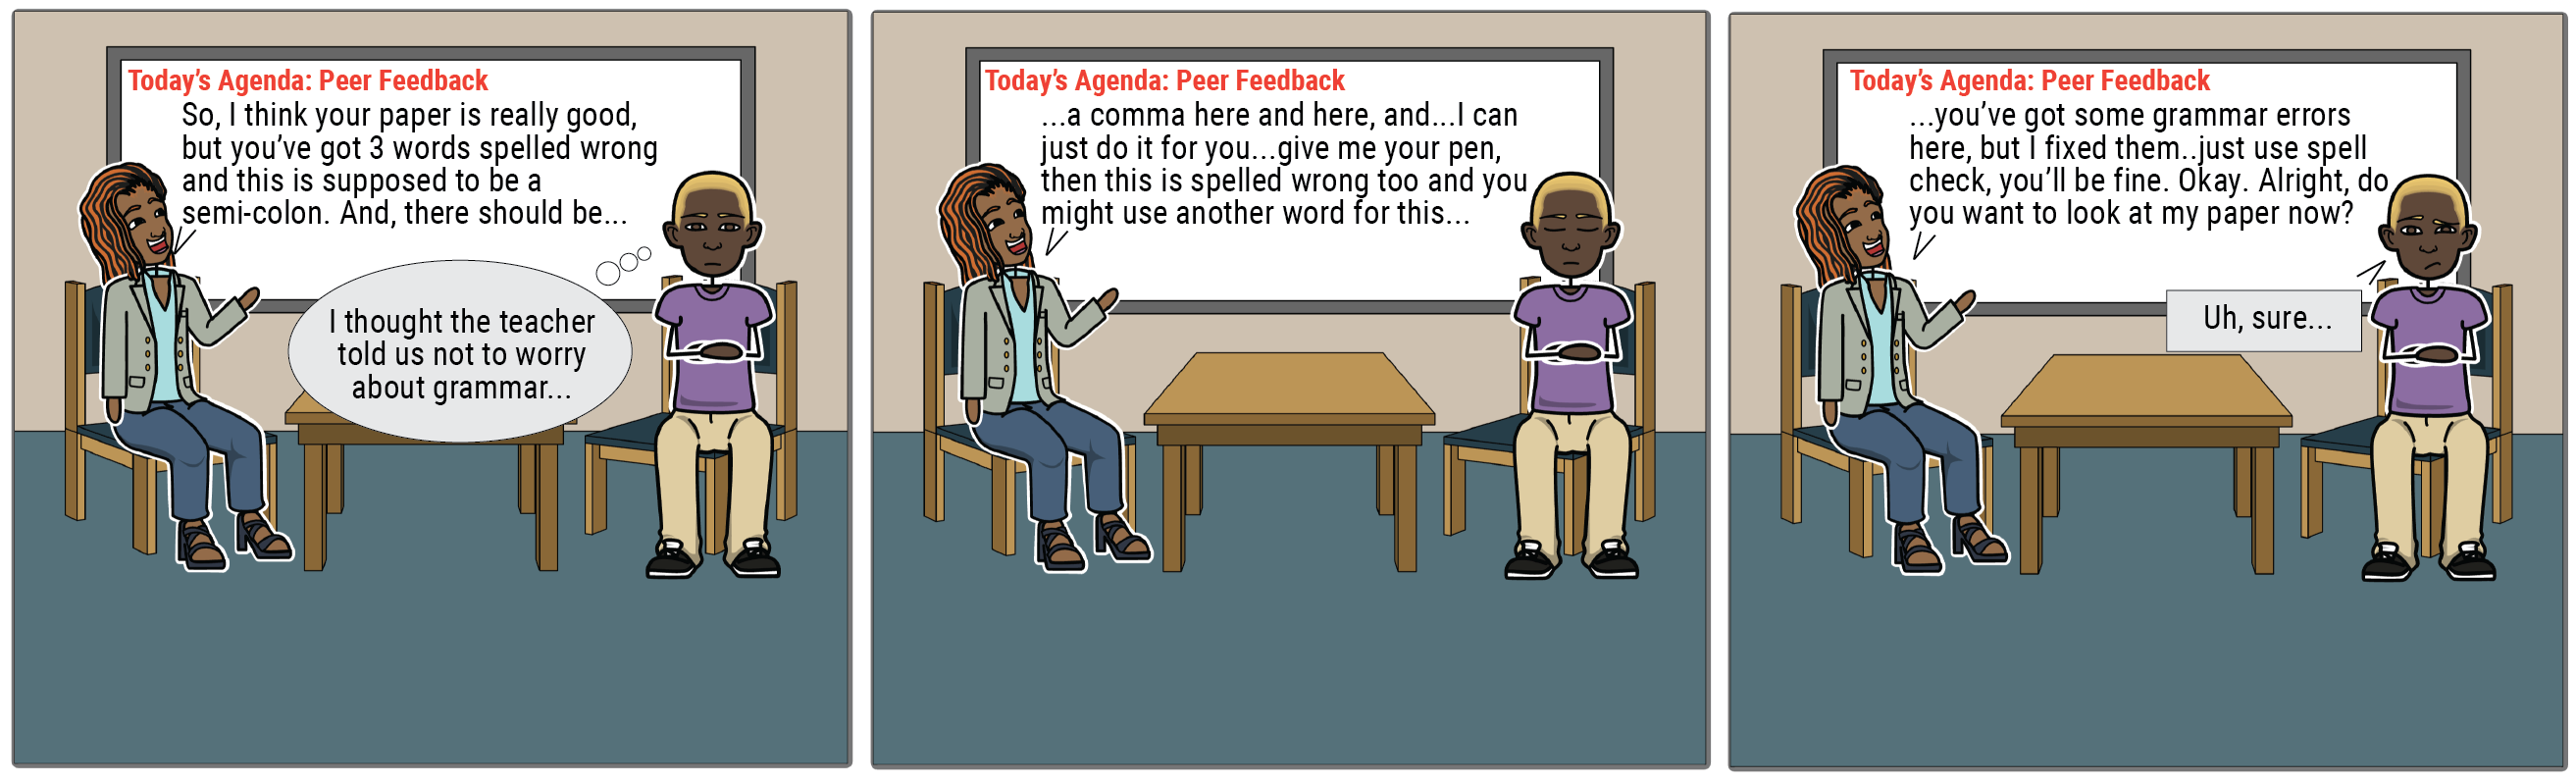 A comic strip shows two students giving peer feedback. Student 1: "So, I think your paper is really good, but you've got three words spelled wrong and this is supposed to be a semicolon. And there should be..." Student 2 thinks, "I thought the teacher told us not to worry about grammar." Student 1: "...a comma here and here and ... I can just do it for you ... give me your pen, then this is spelled wrong too and you might use another word for this." Student 1 continues: "You've got some grammar errors here, but I fixed them ... just use spellcheck and you'll be fine. Okay. All right, do you want to look at my paper now?" Student 2: "Uh, sure."